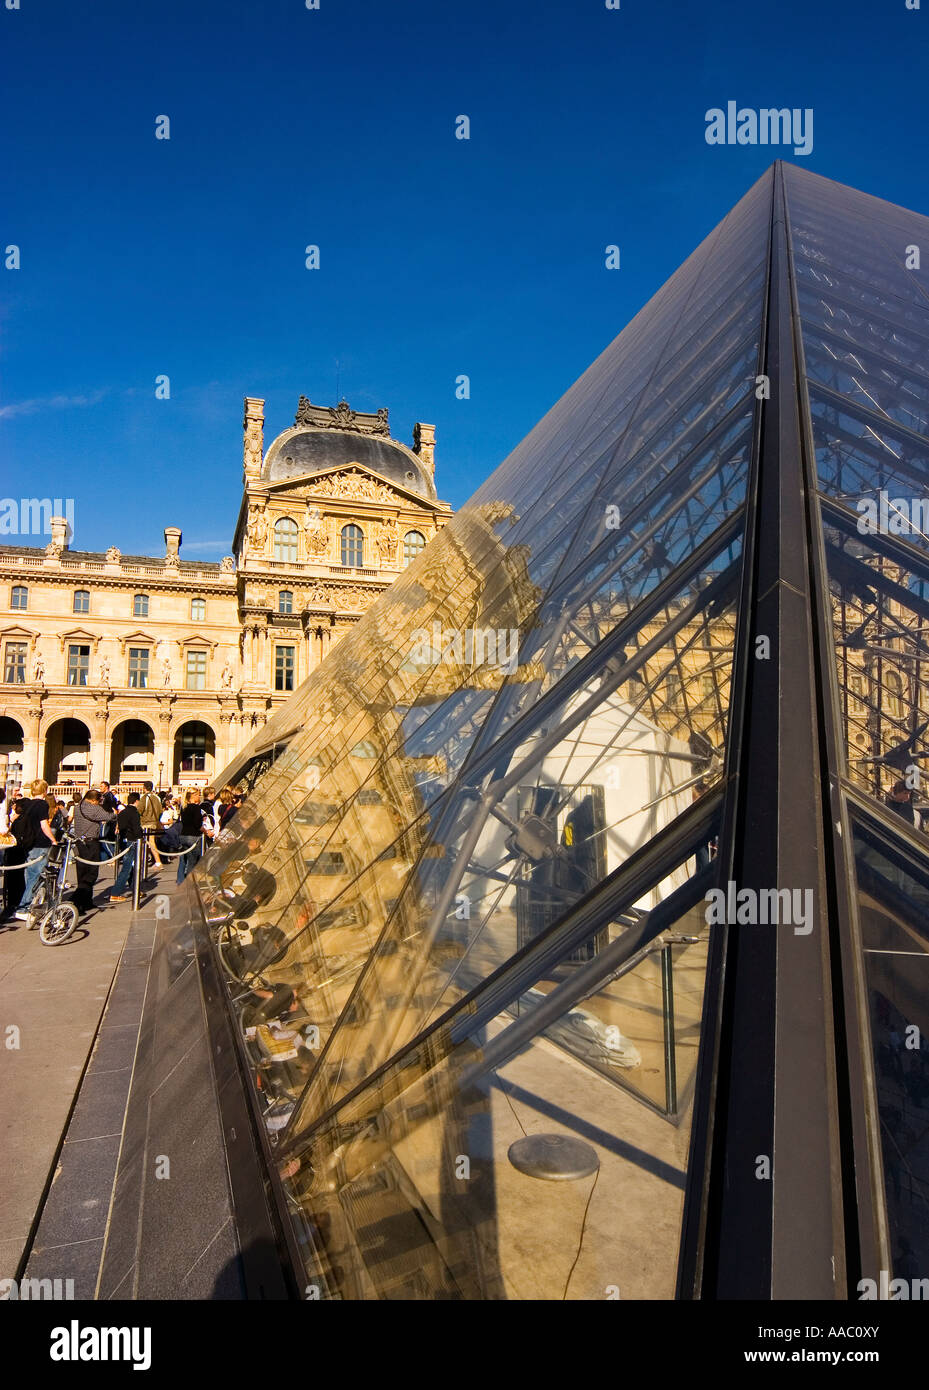 The Denon wing and pyramid at the Louvre museum Paris France Stock Photo